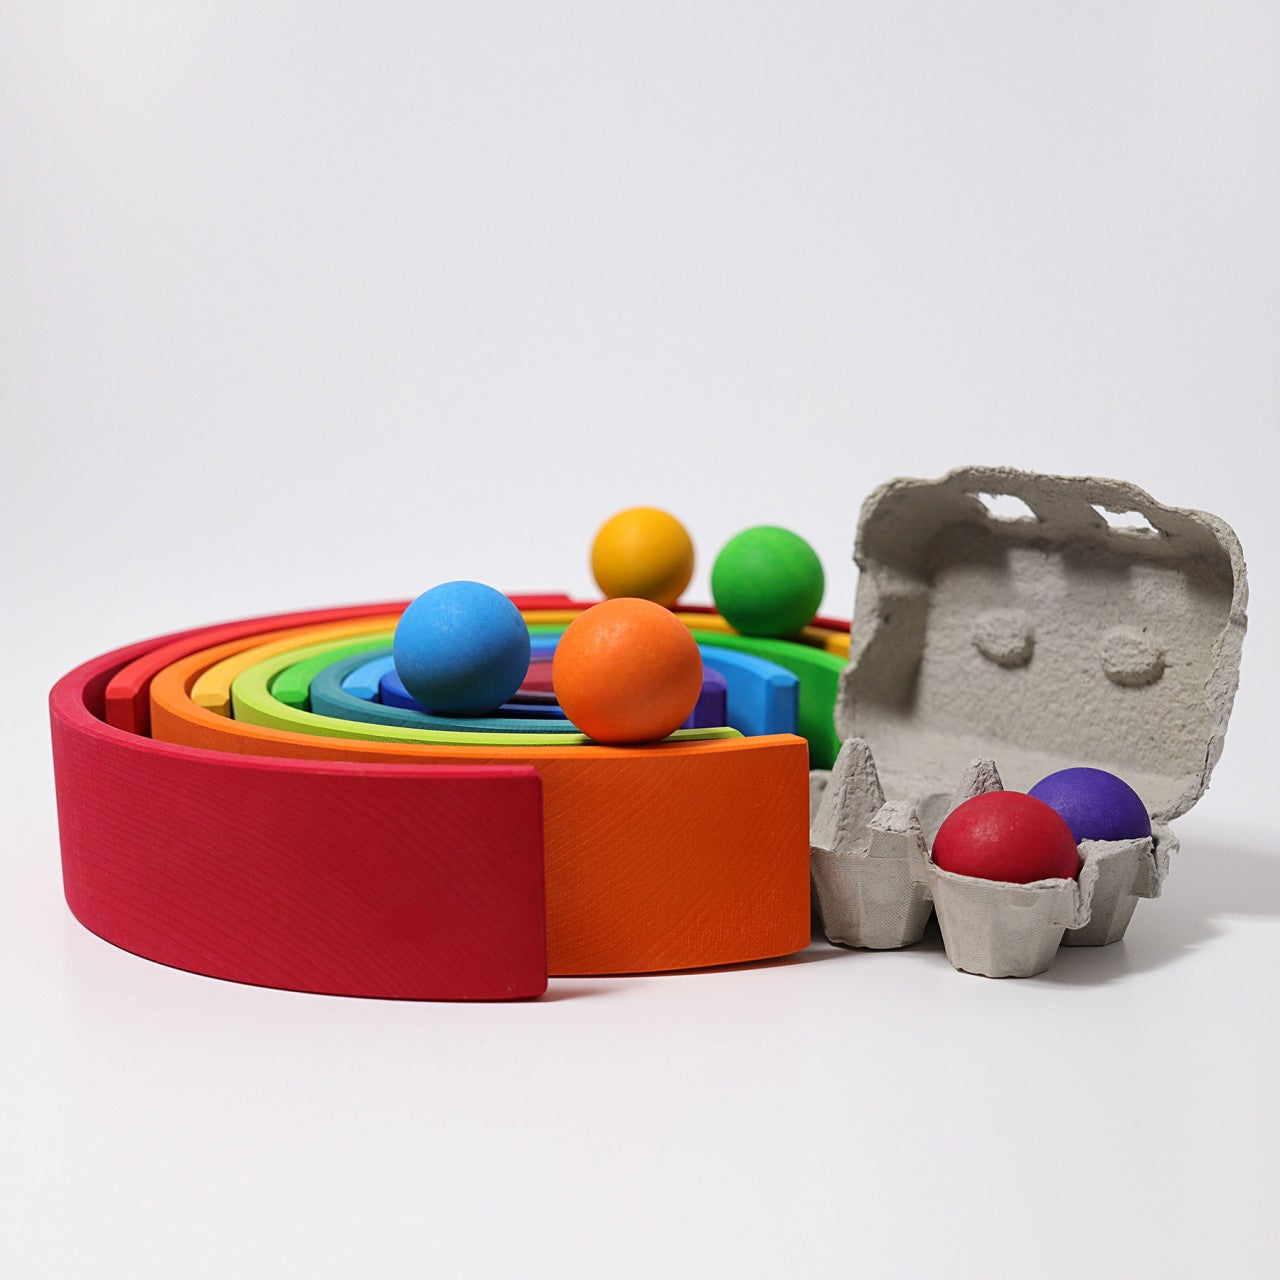 Large Rainbow | 12 Pieces | Wooden Toys for Kids | Open-Ended Play